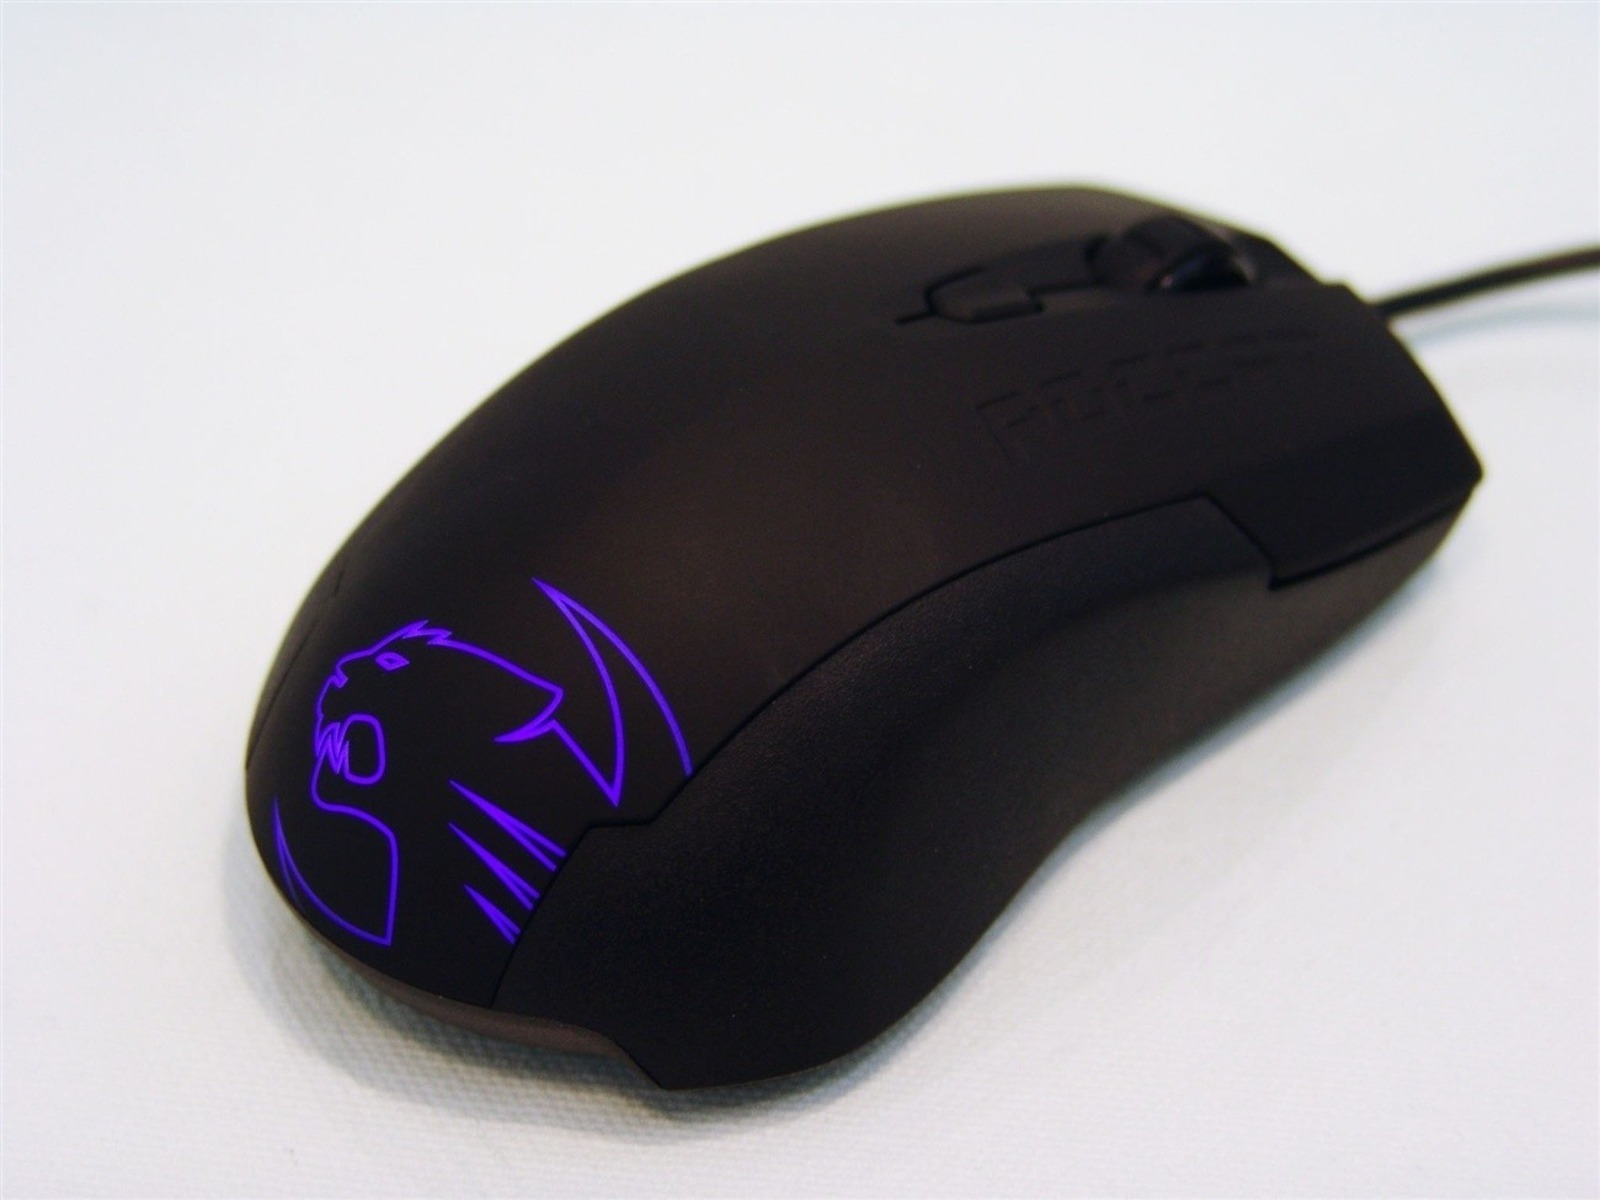 Roccat Tri-Button Gaming Mouse: How Do You Map The Button